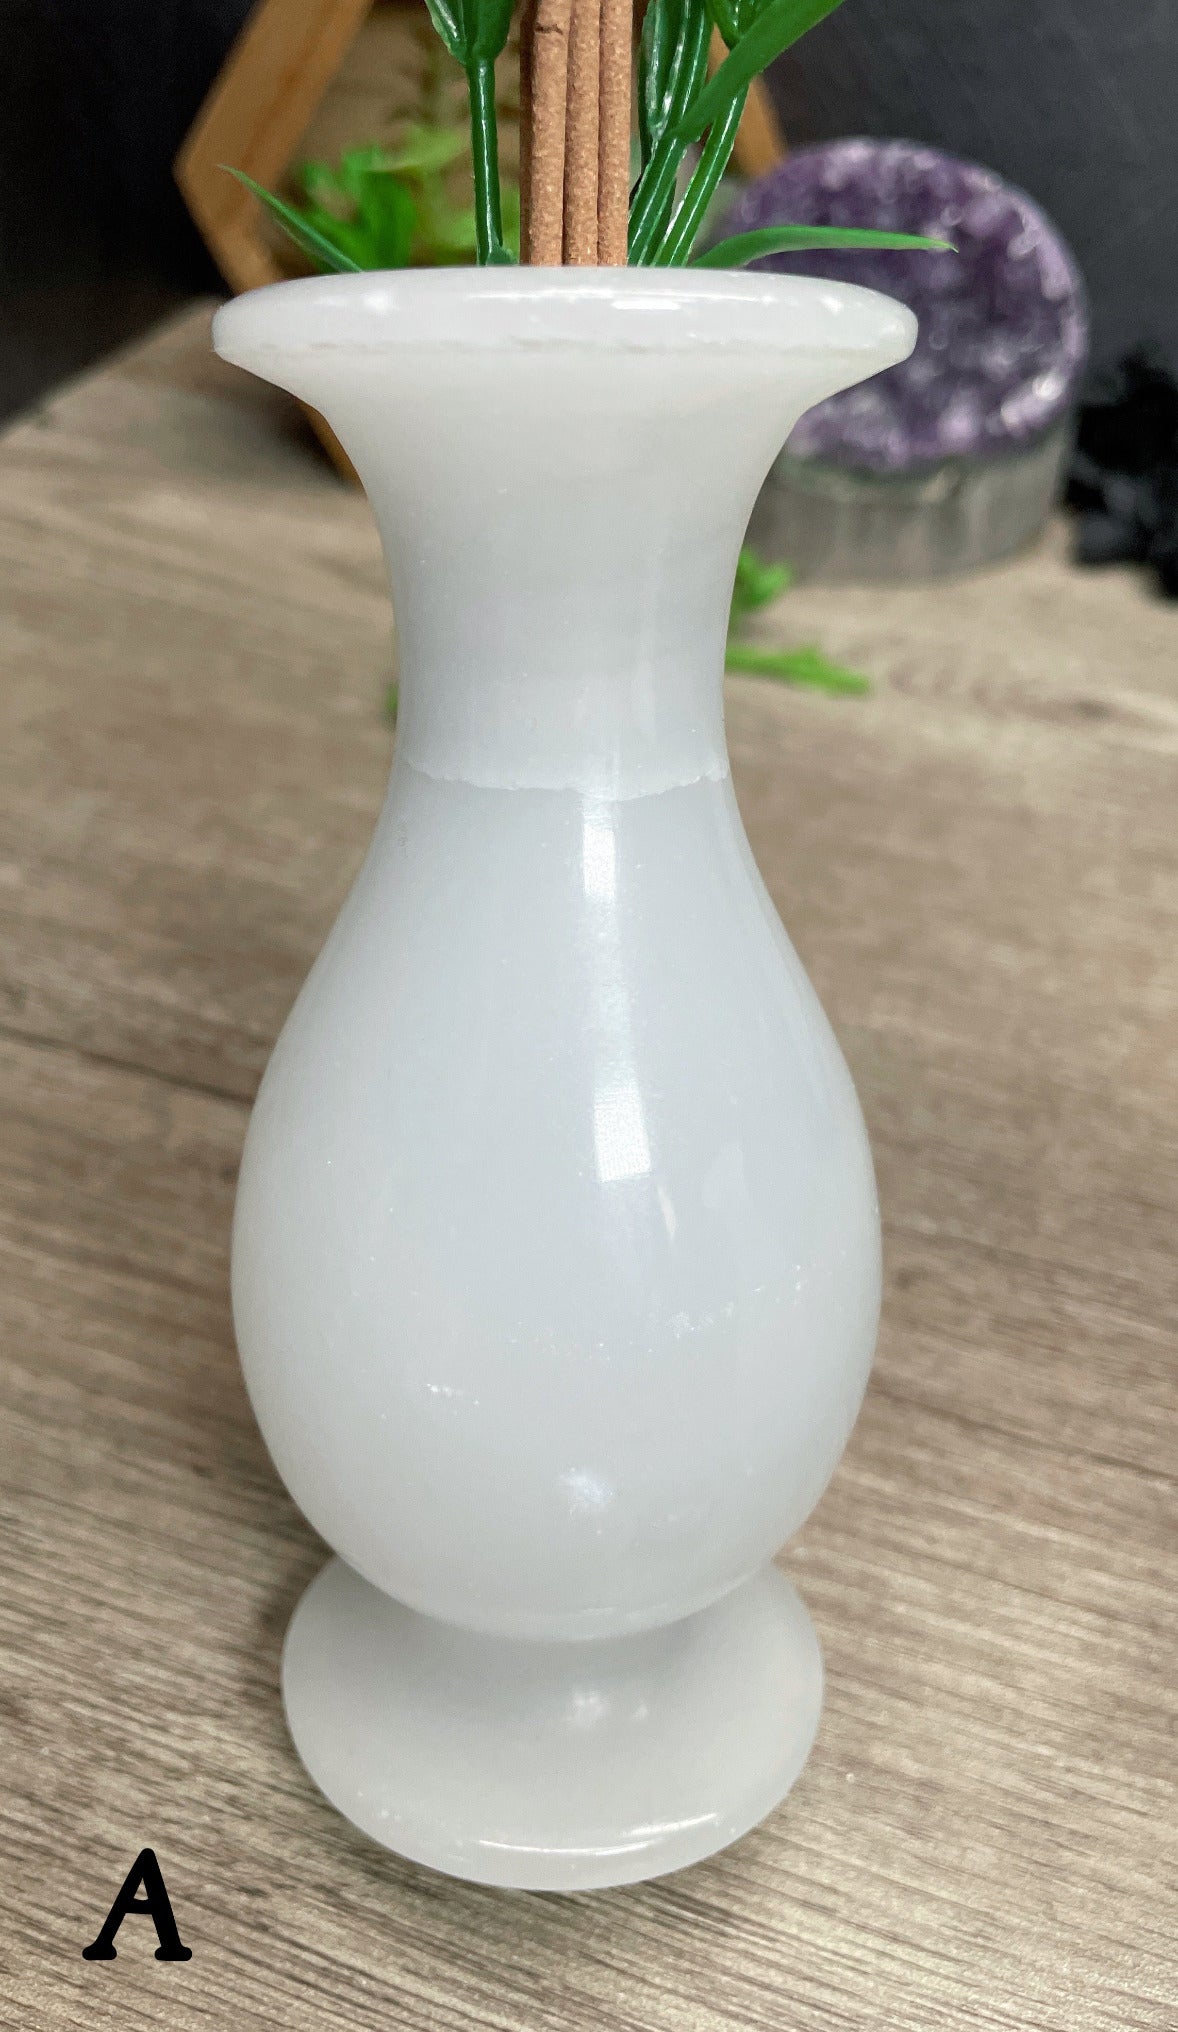 Pictured is a vase carved out of white marble.